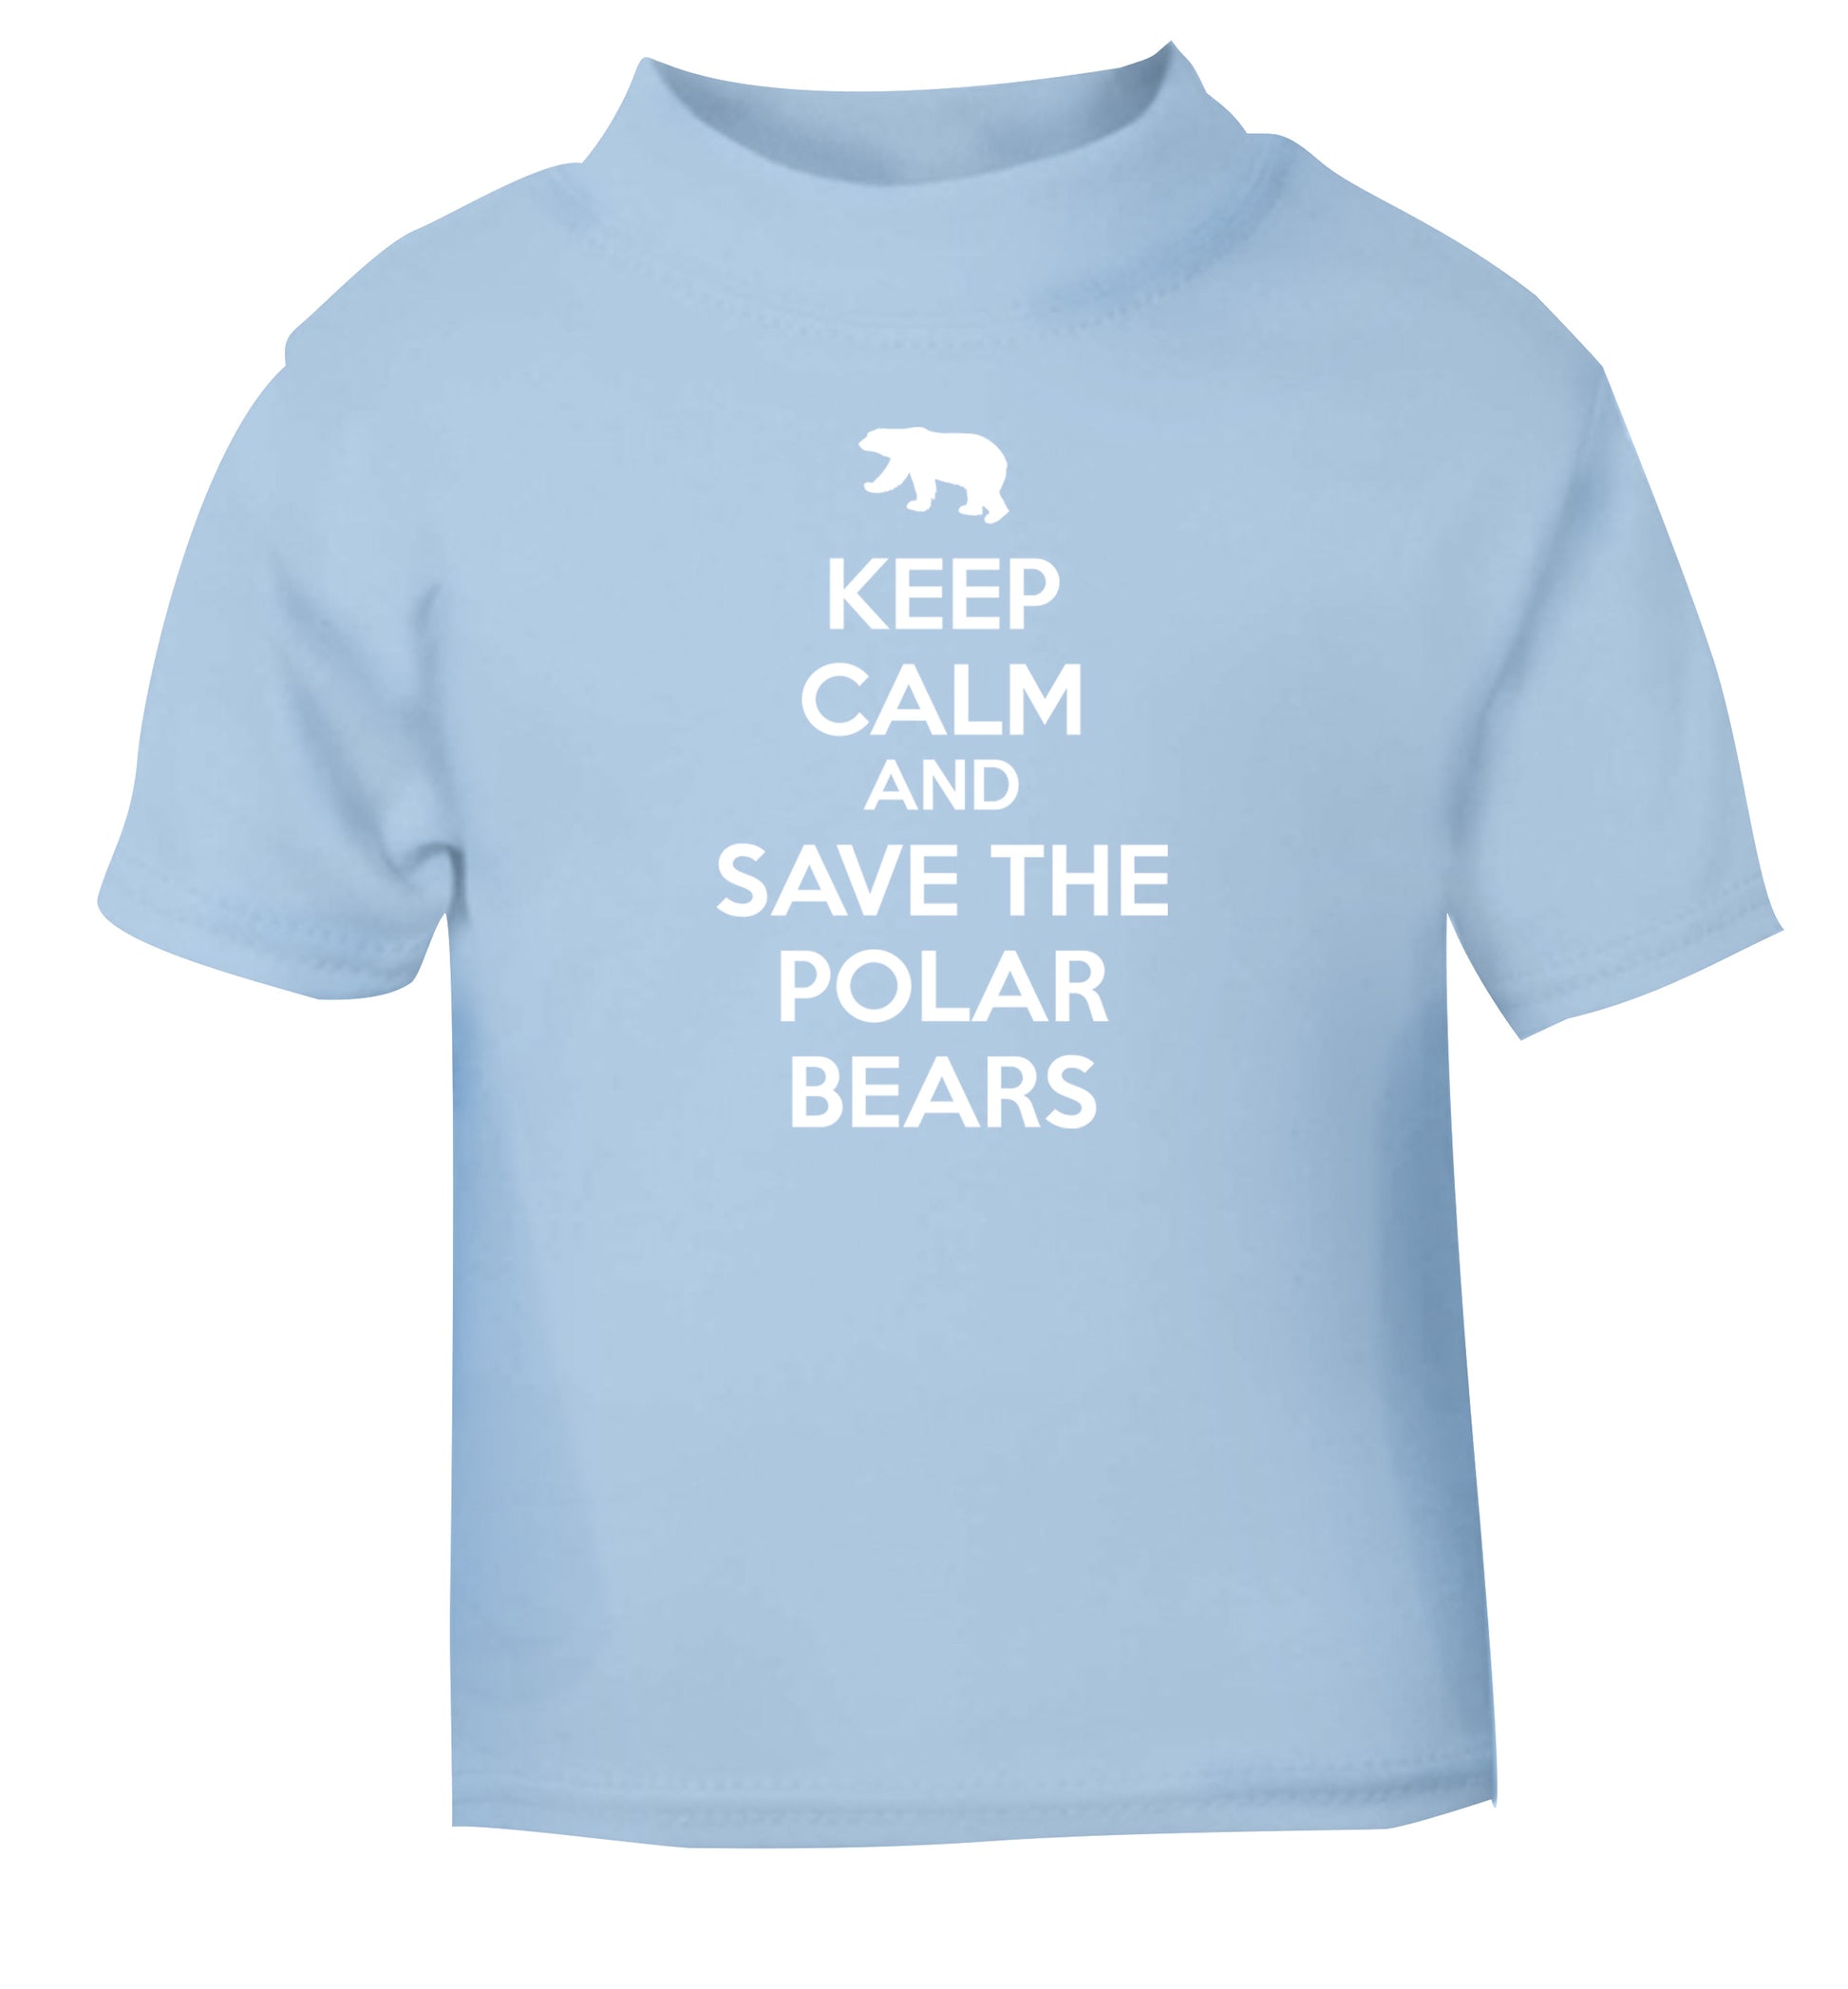 Keep calm and save the polar bears light blue Baby Toddler Tshirt 2 Years